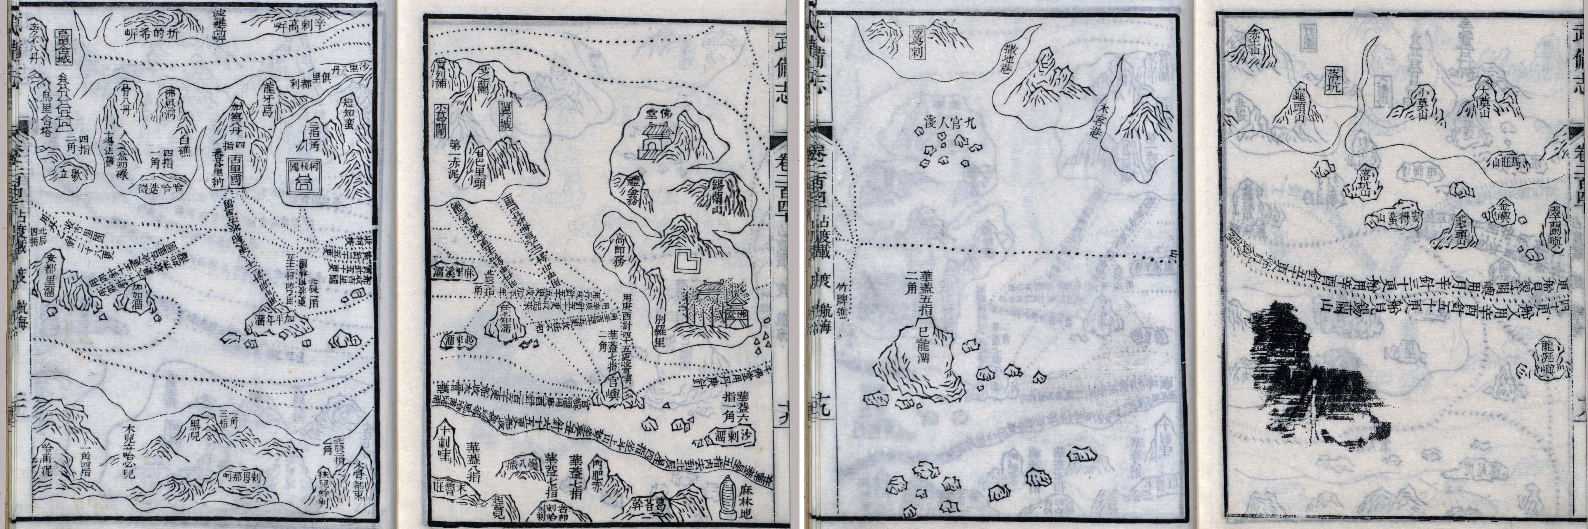 Wu bei zhi 1644 map of Admiral Zheng He's Voyage, page pairs 20-19 (17-18 of 20)